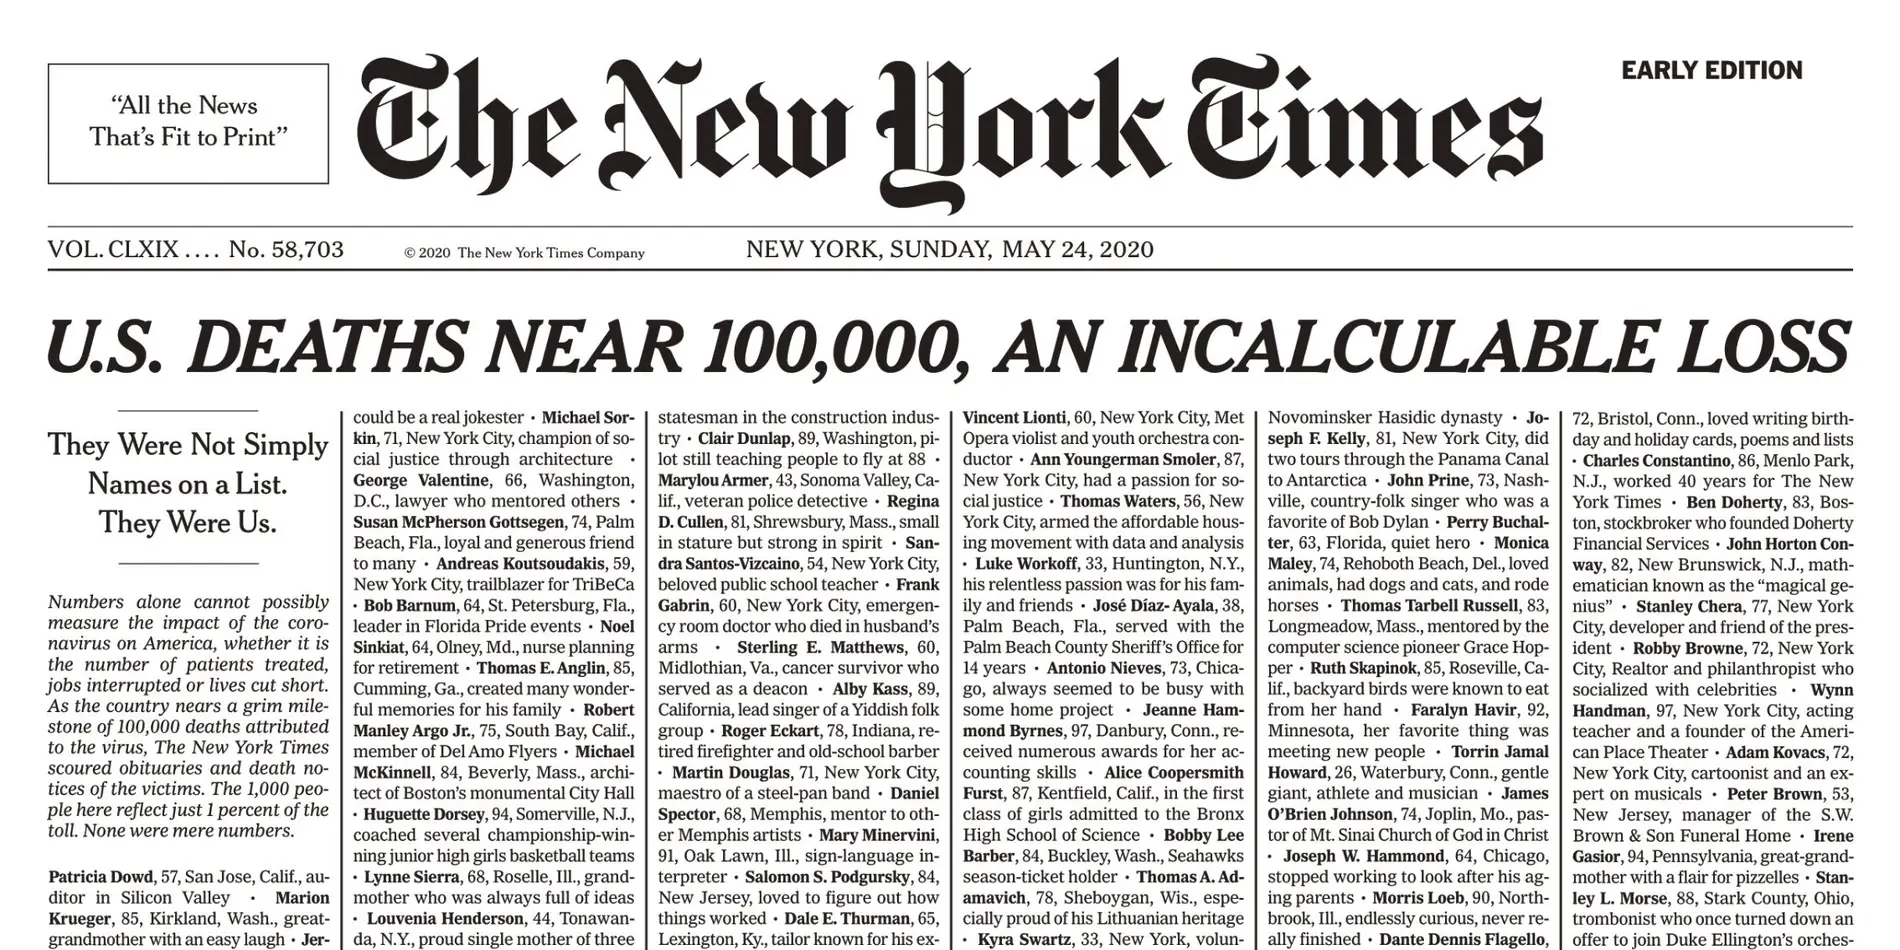 ny times front page reveals heart breaking name list of 1000 covid 19 deaths just 1 of us tally